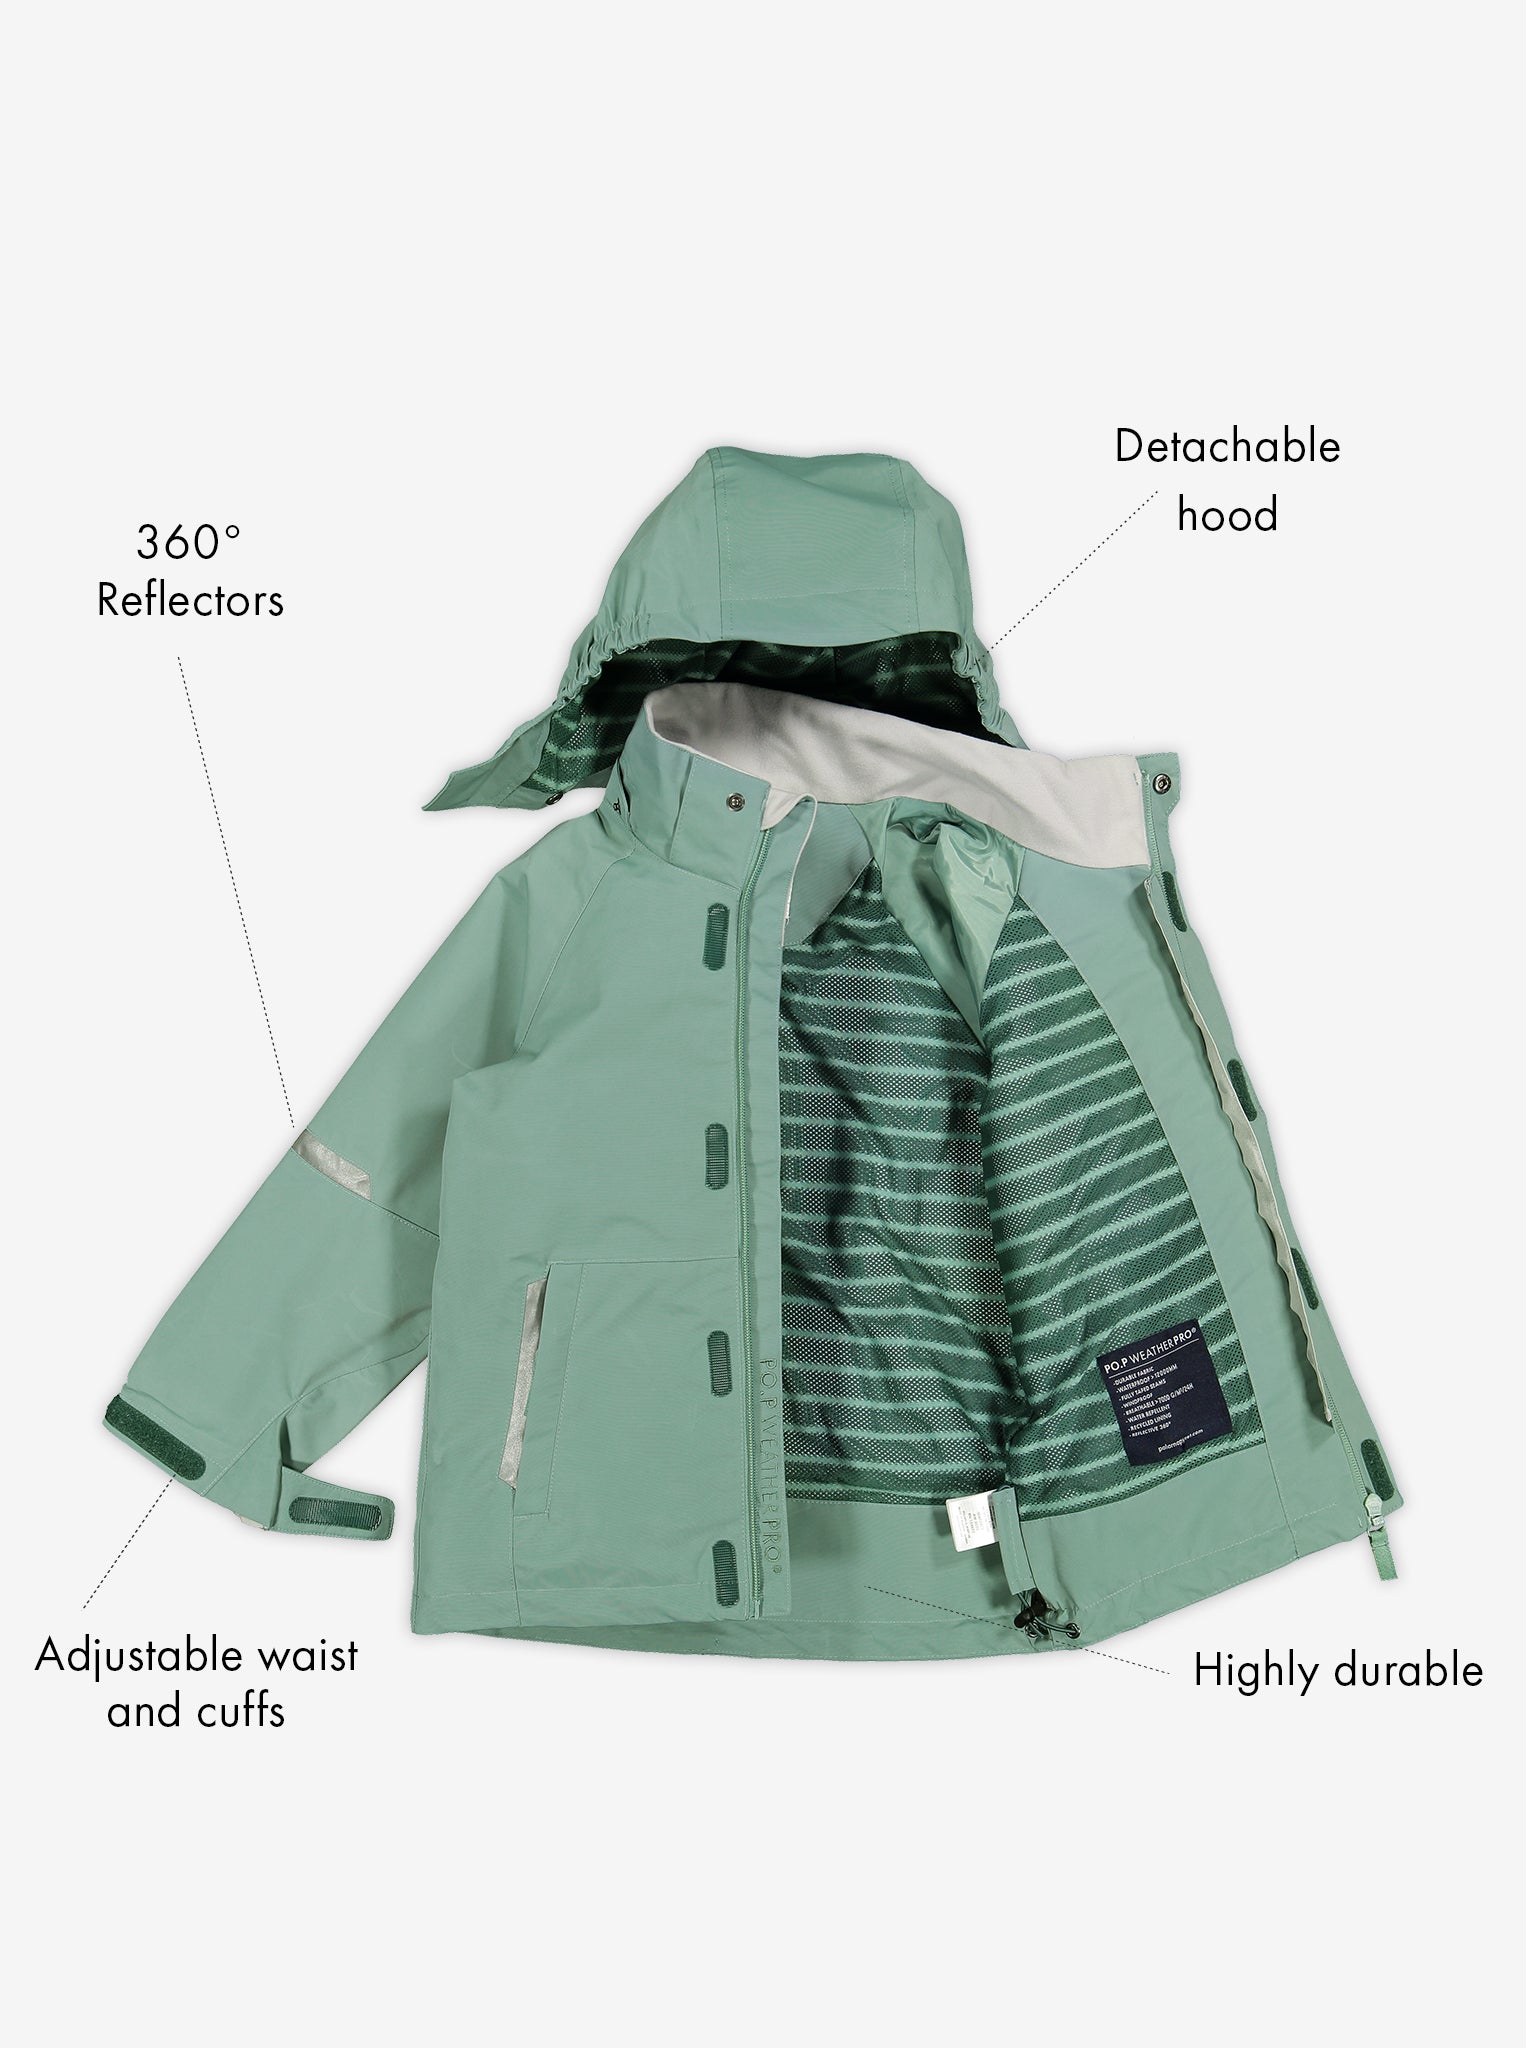 Lightweight kids waterproof jacket in colour green, includes a detachable hood, reflectors and adjustable waist and cuffs.